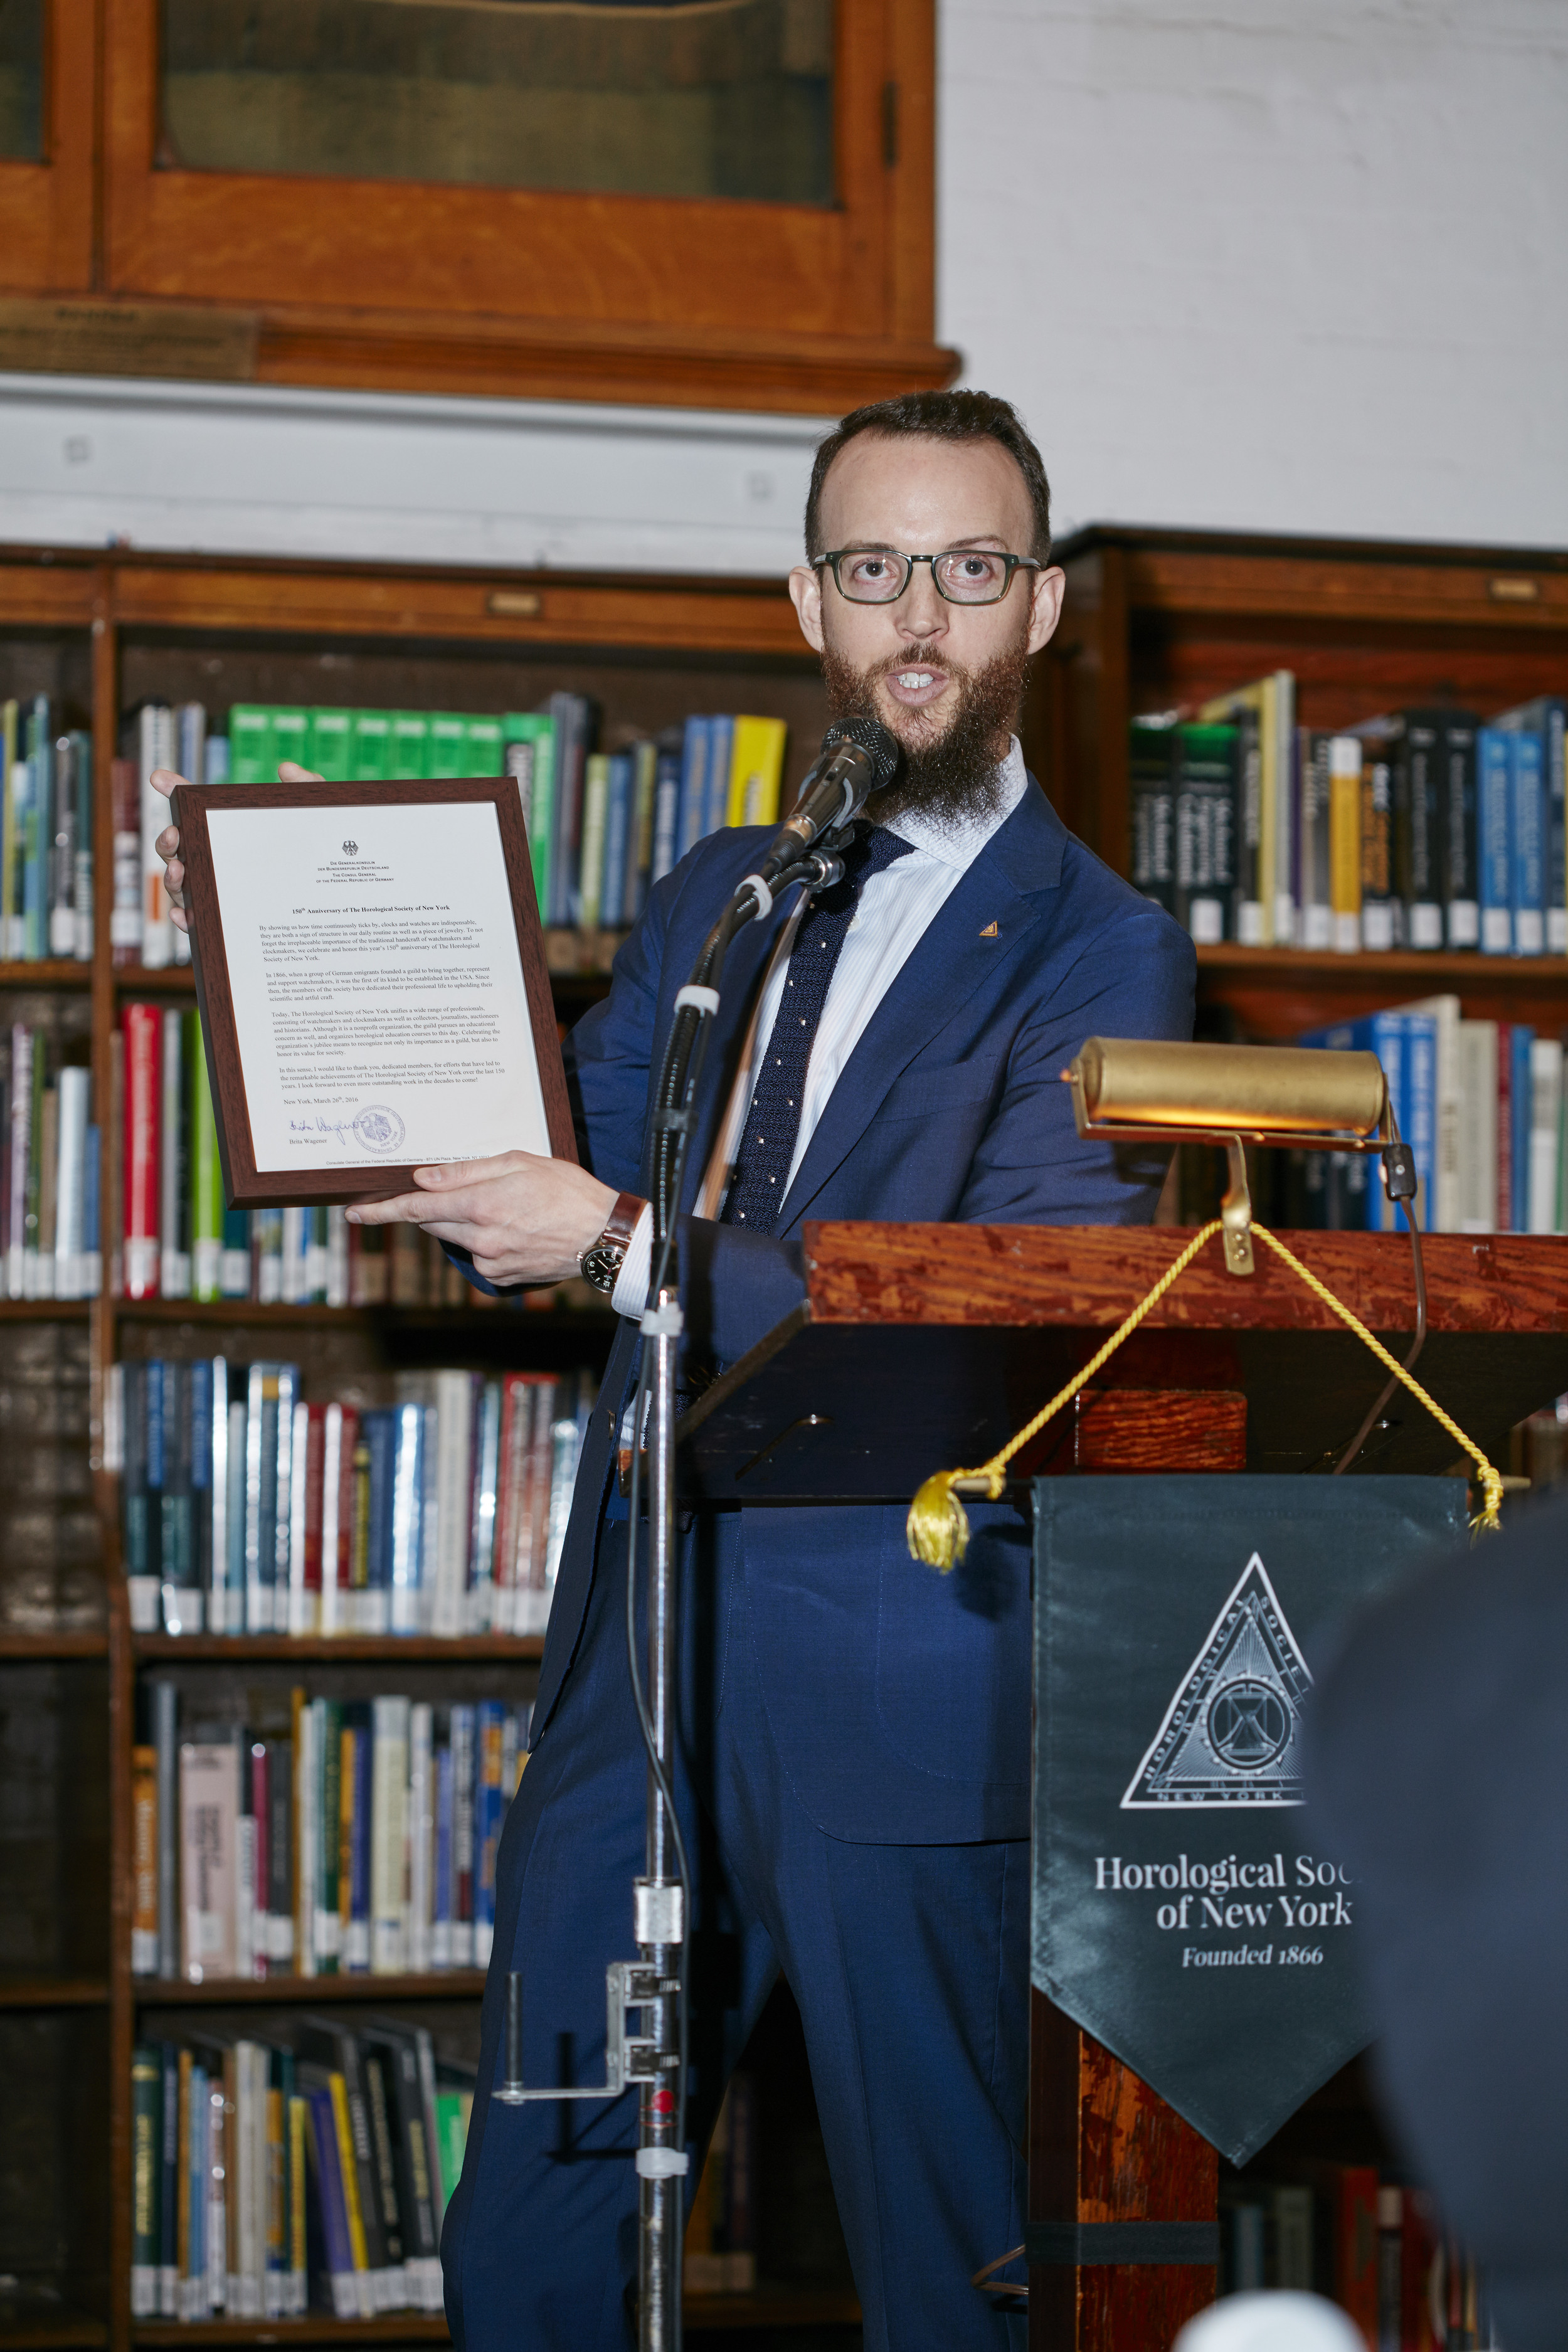   Nicholas Manousos, Vice President of HSNY,&nbsp;presenting a proclamation from the German government  